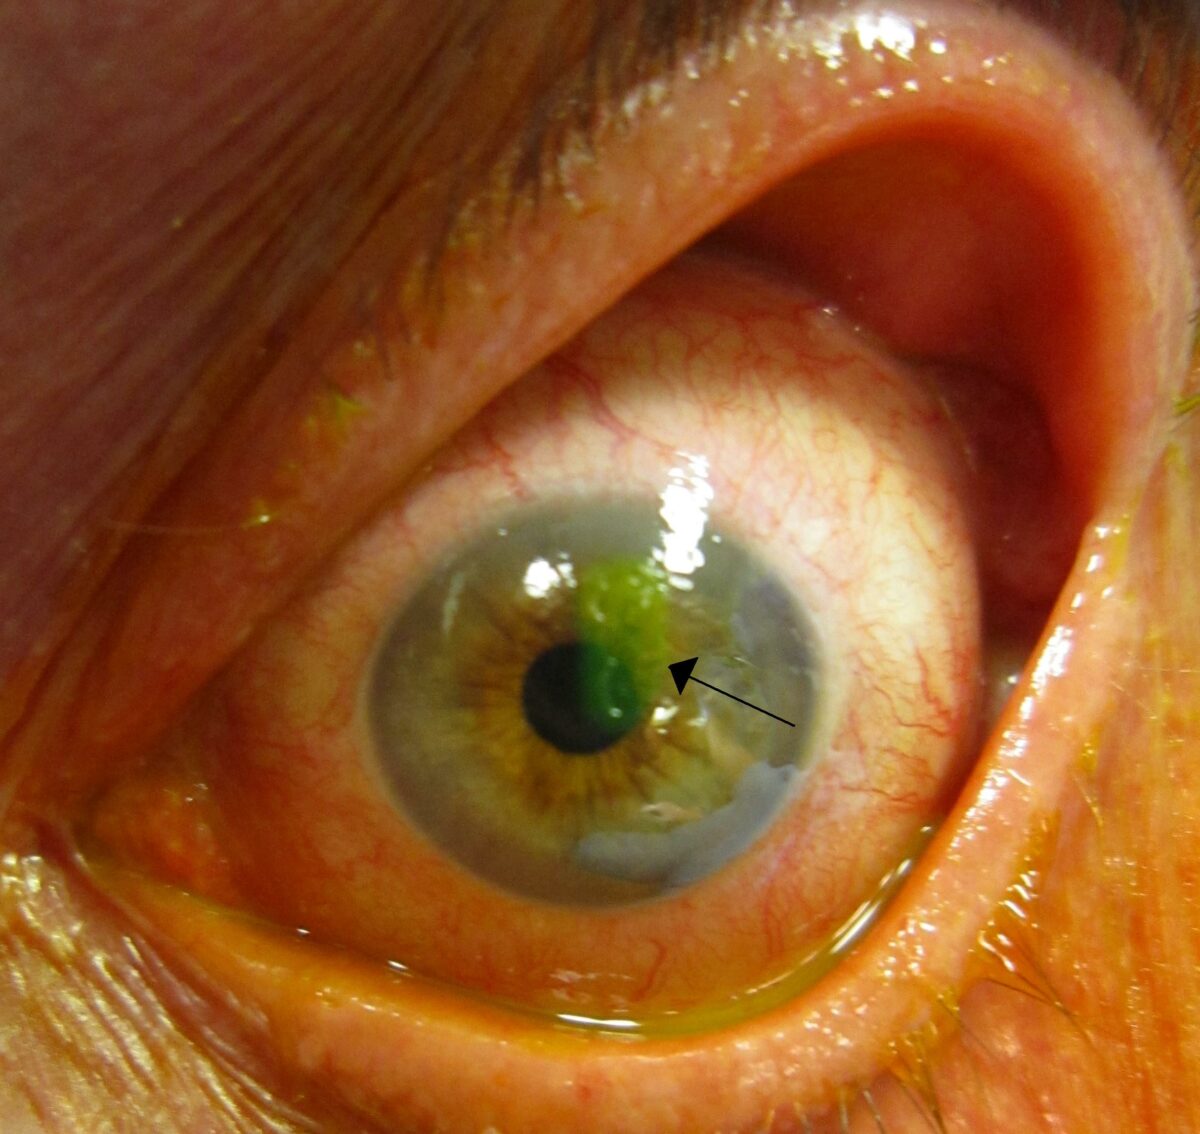 Human_cornea_with_abrasion_highlighted_by_fluorescein_staining